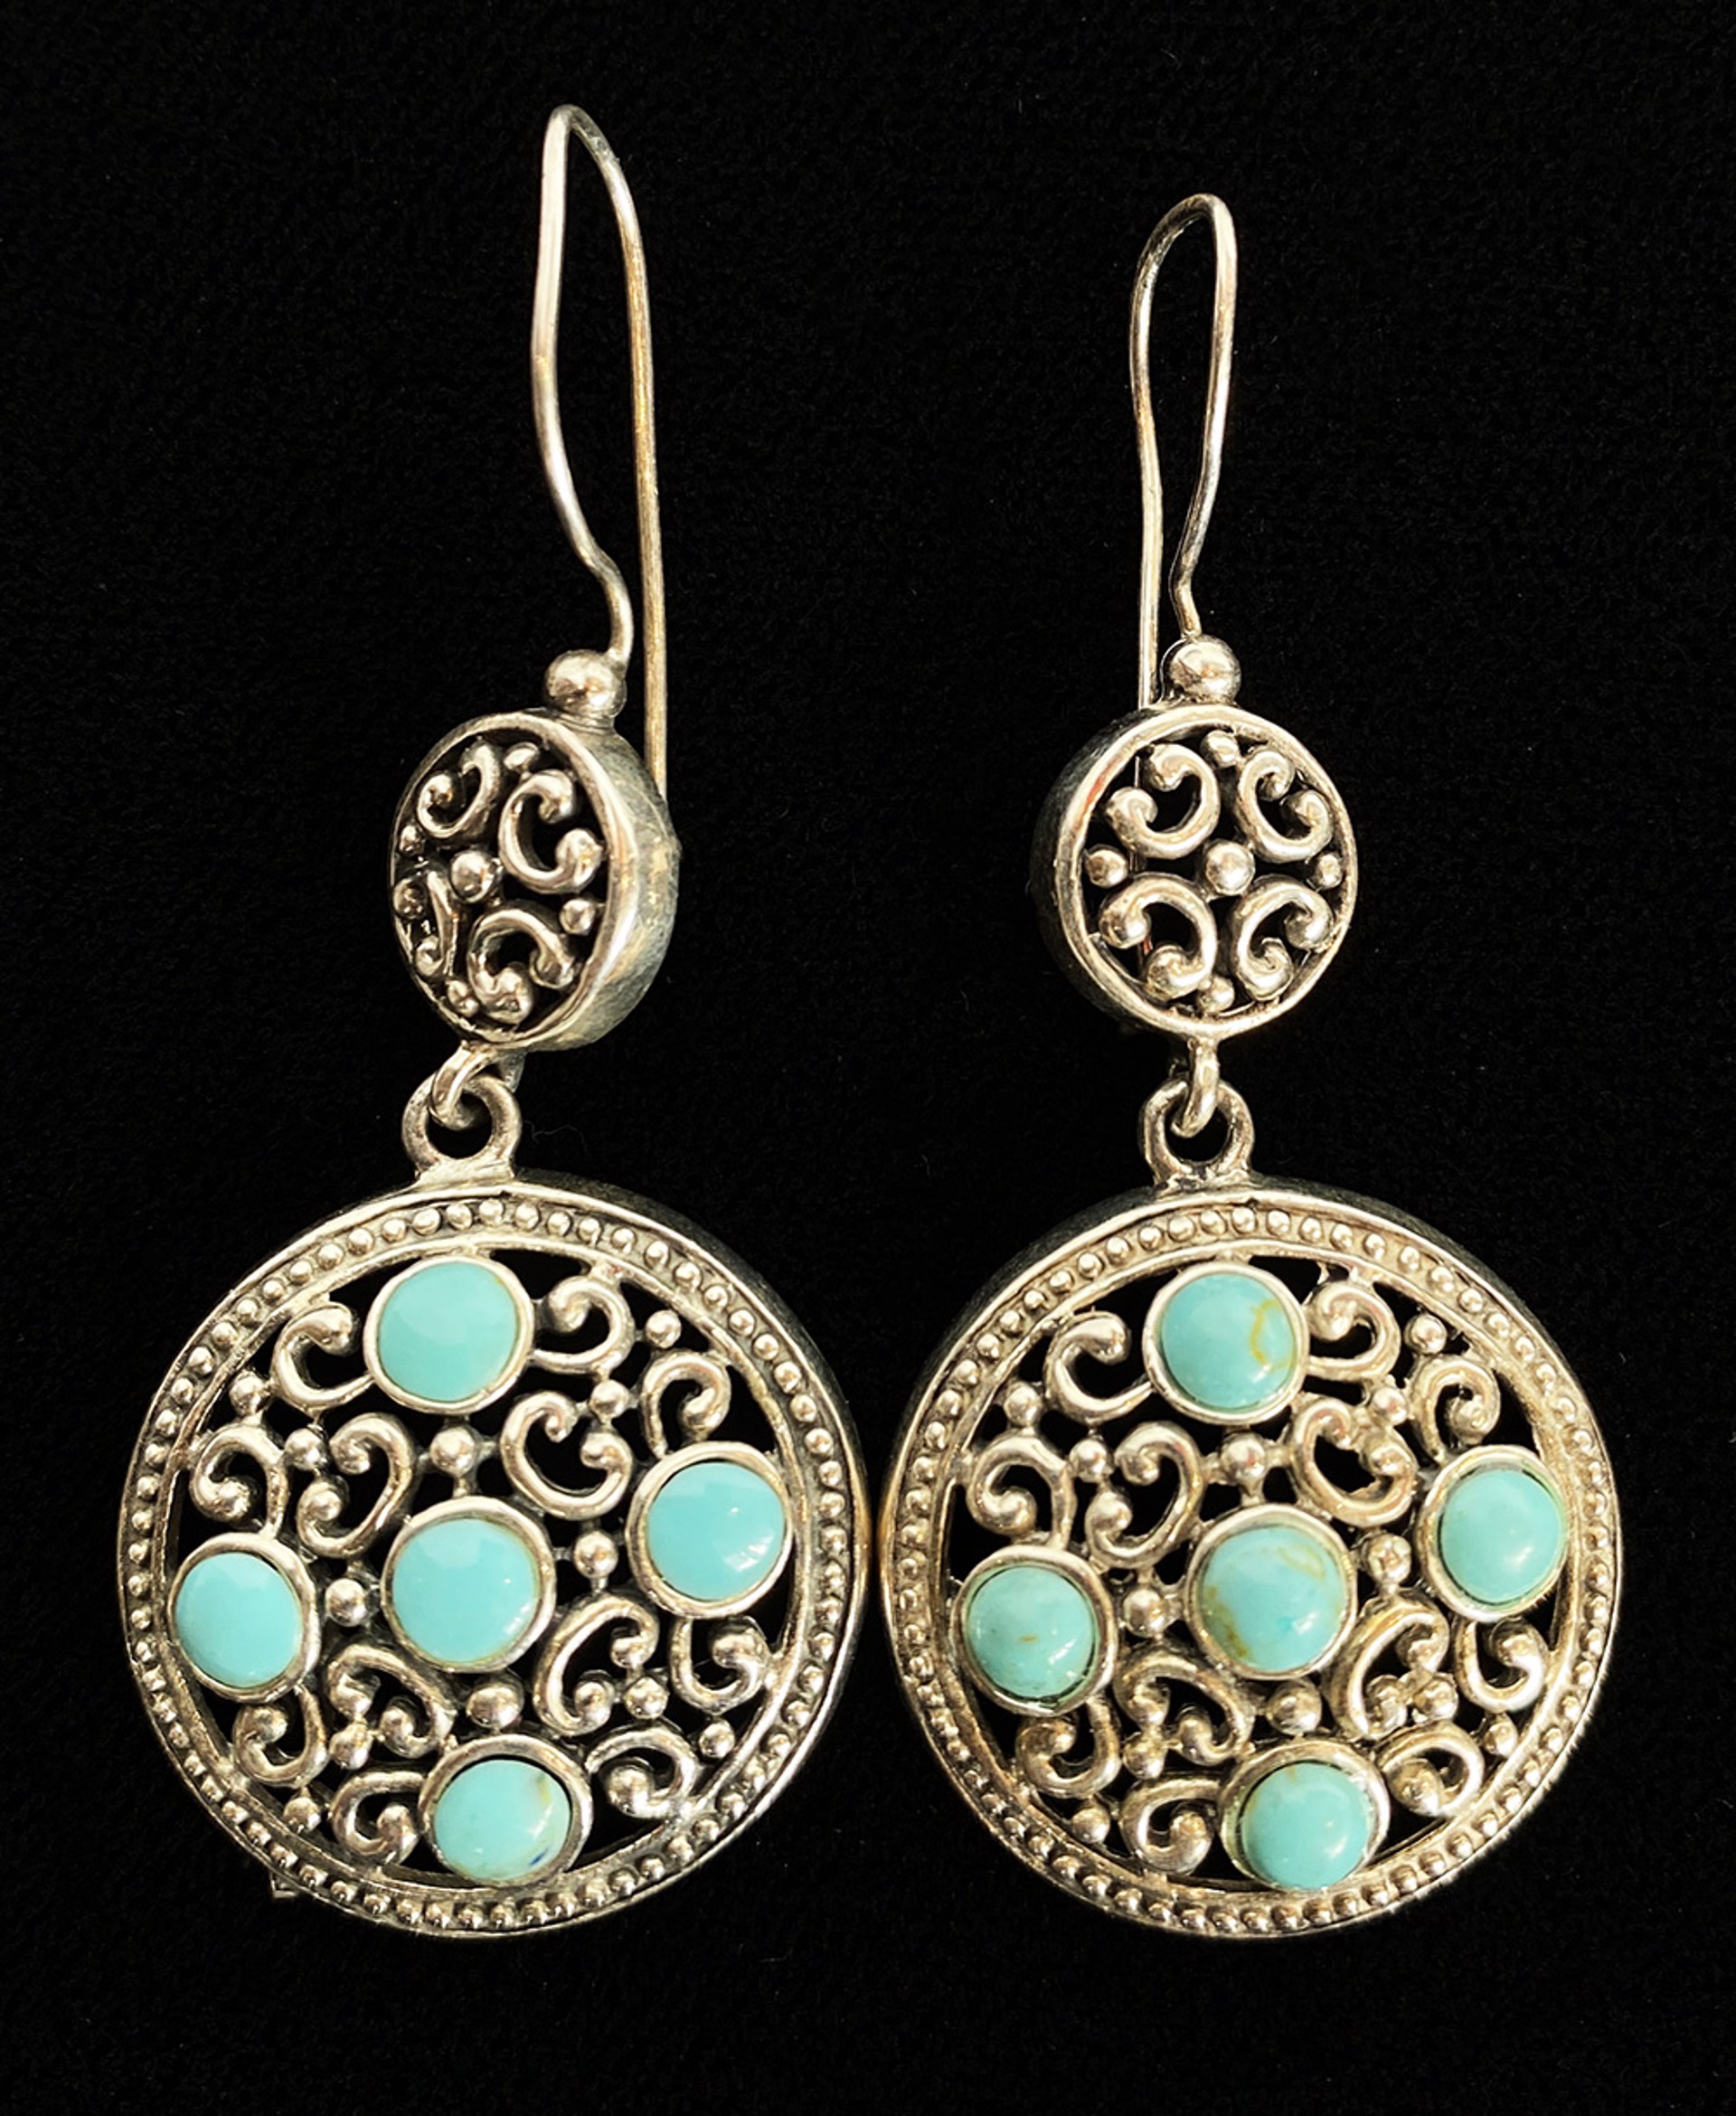 Turquoise Earrings by Artist Unknown